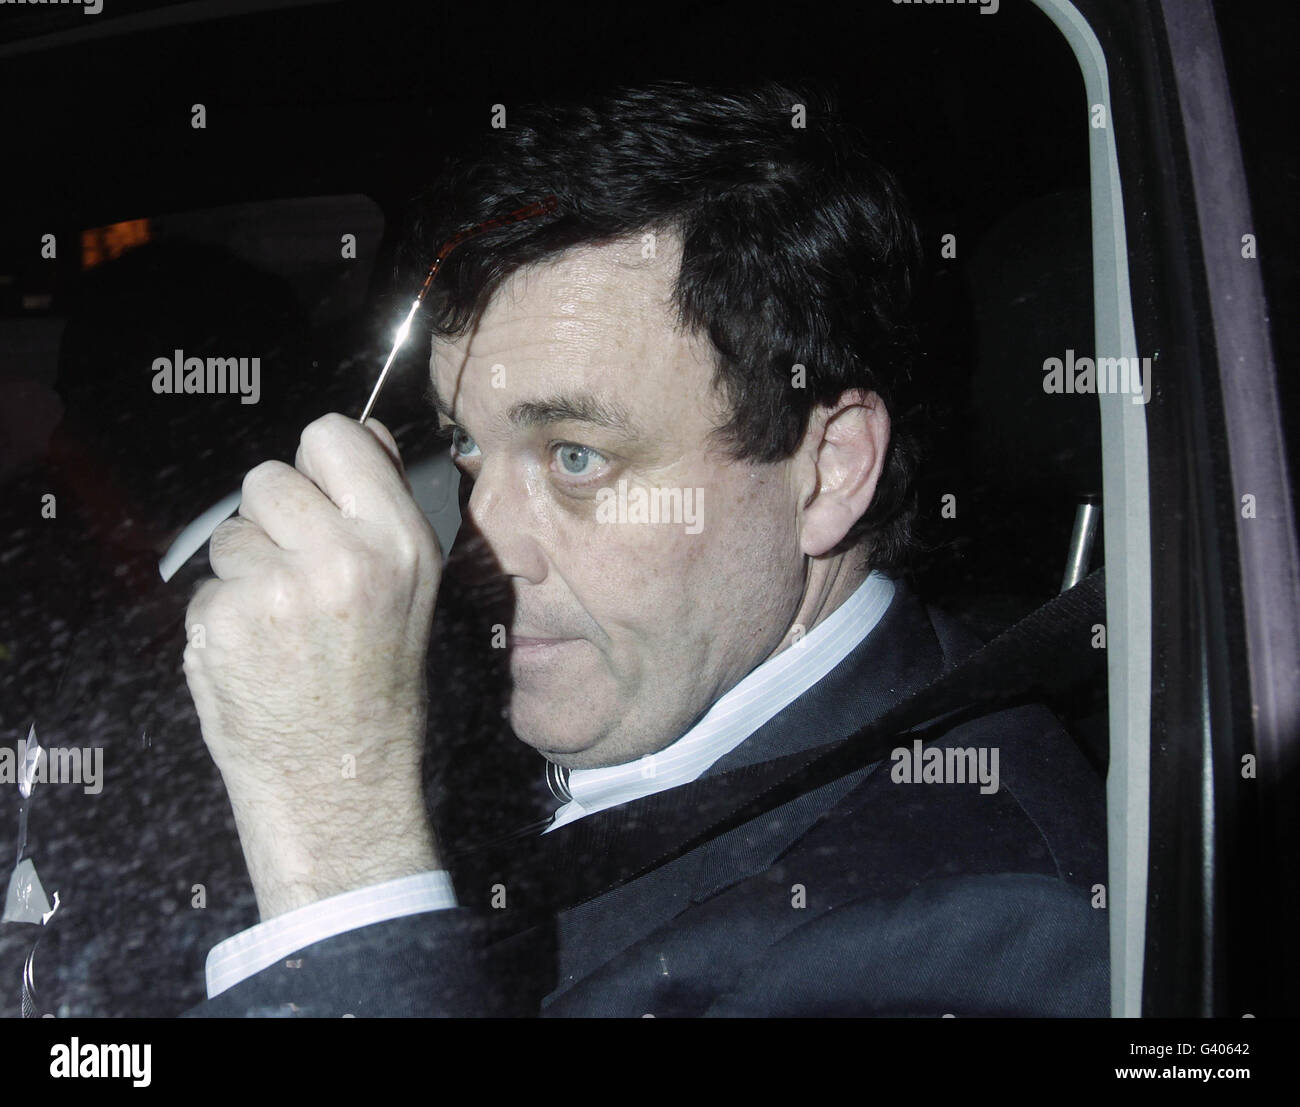 Finance Minister Brian Lenihan leaving Government Buildings in Dublin. Taoiseach Brian Cowen warned opponents that there was no vacancy in his office as he offered to sit down with disgruntled party colleagues over his under-fire leadership. Stock Photo